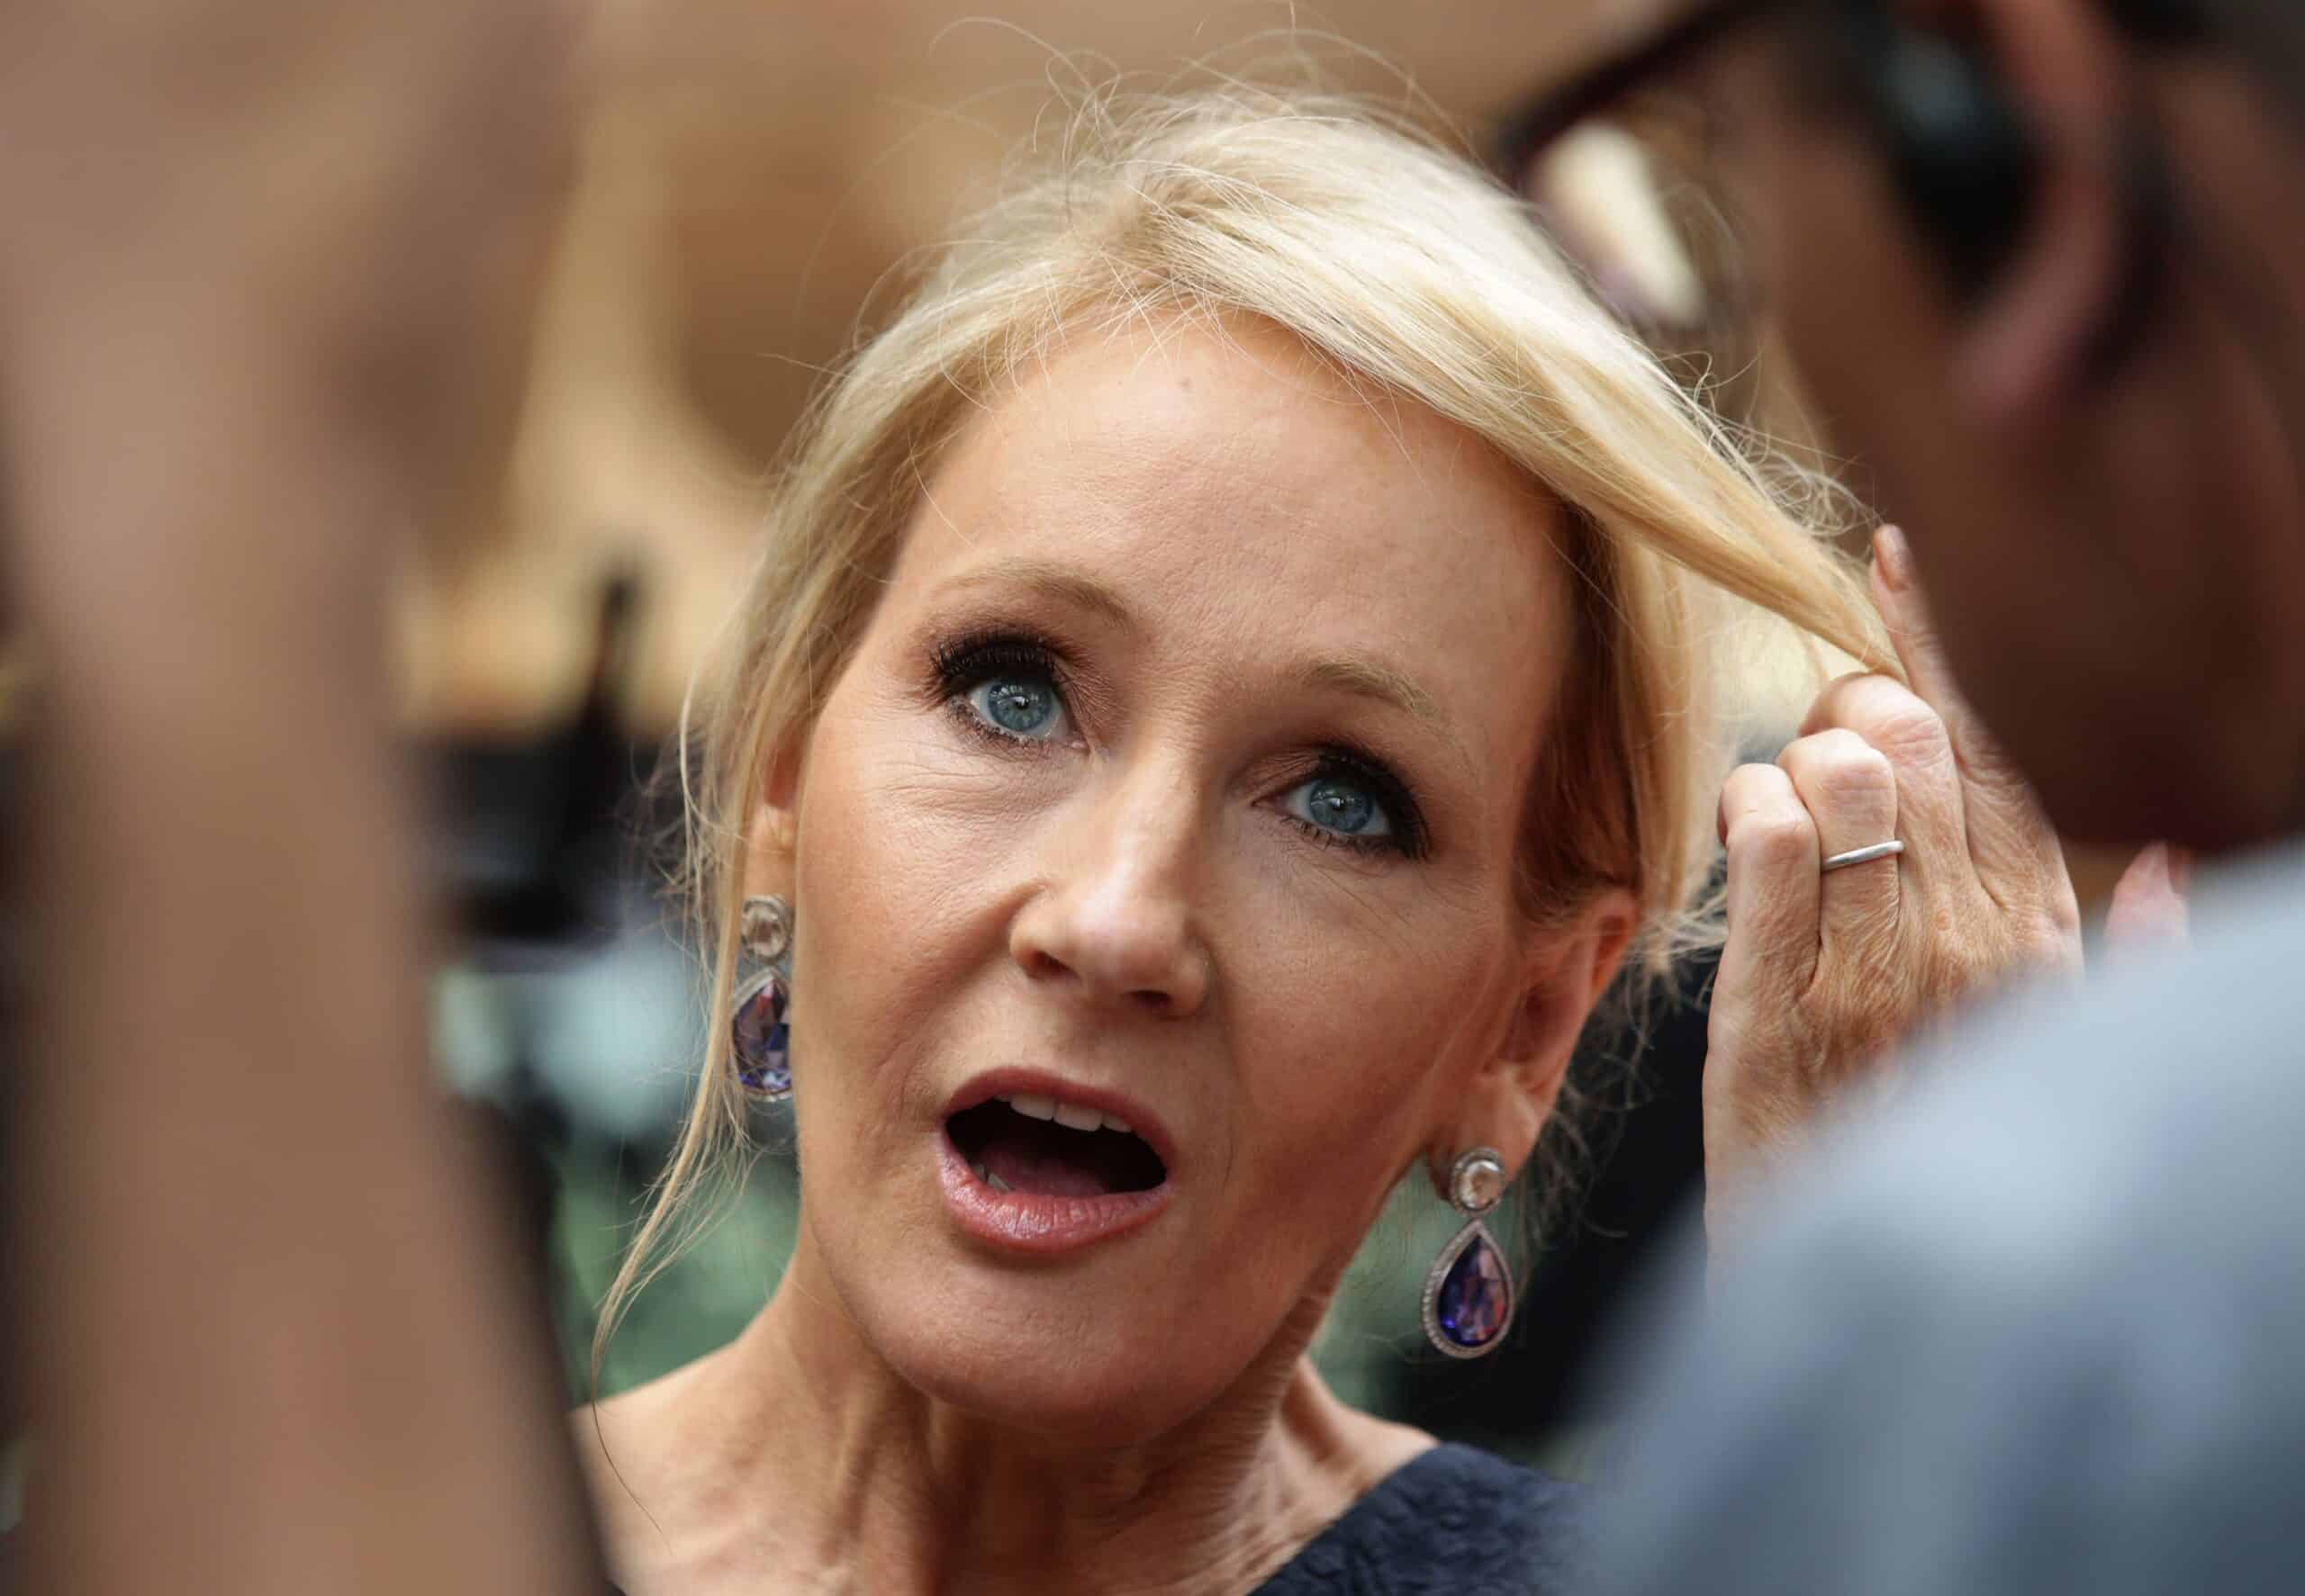 JK Rowling will not delete posts which could breach hate crime laws